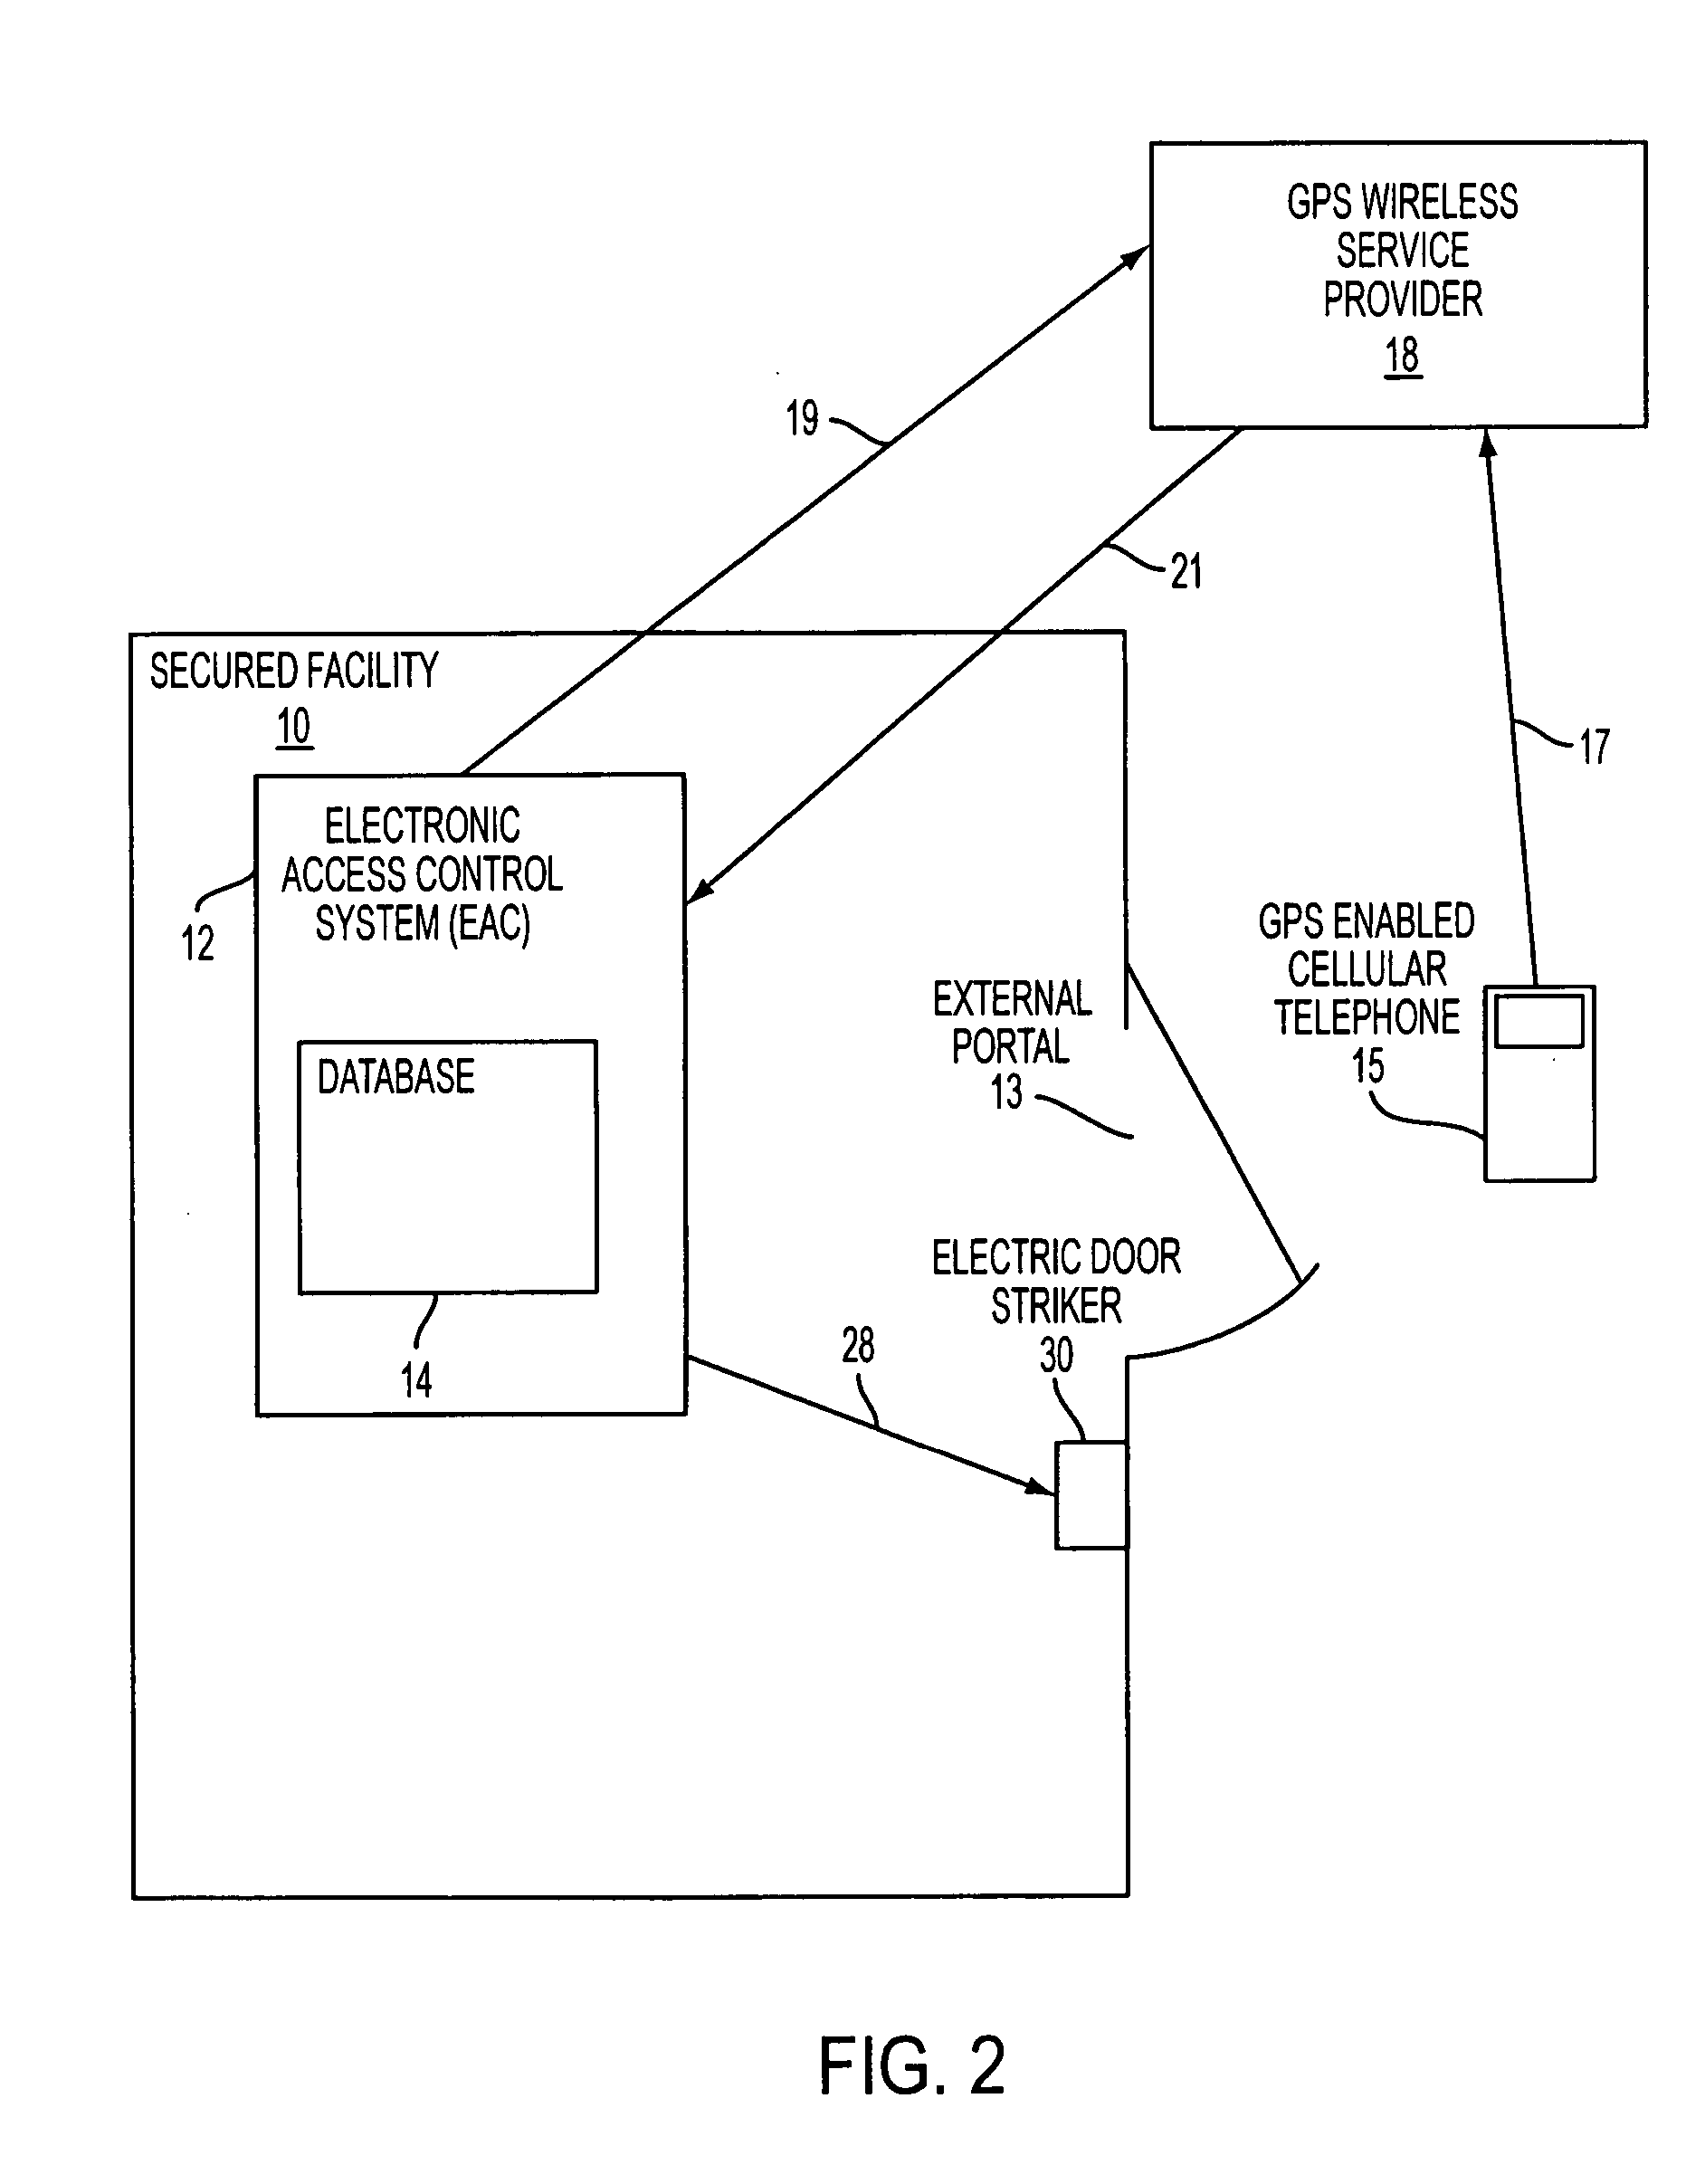 Cellular telephone based electronic access control system